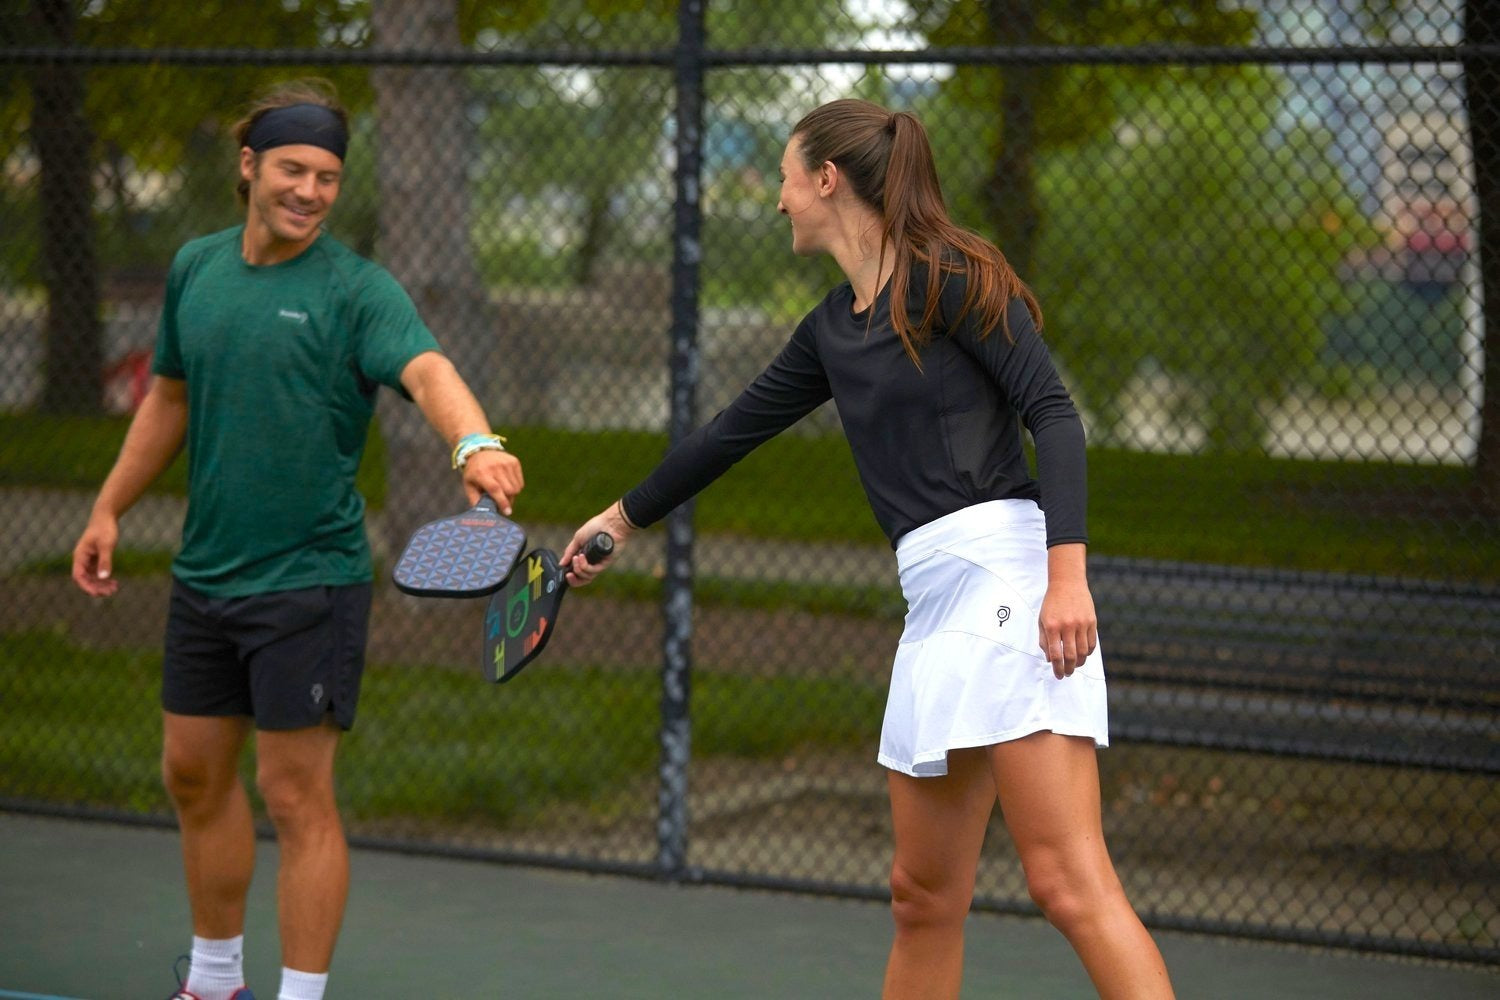 Mind Game: A Quantum Performance Leap for Competitive Pickleball and Tennis